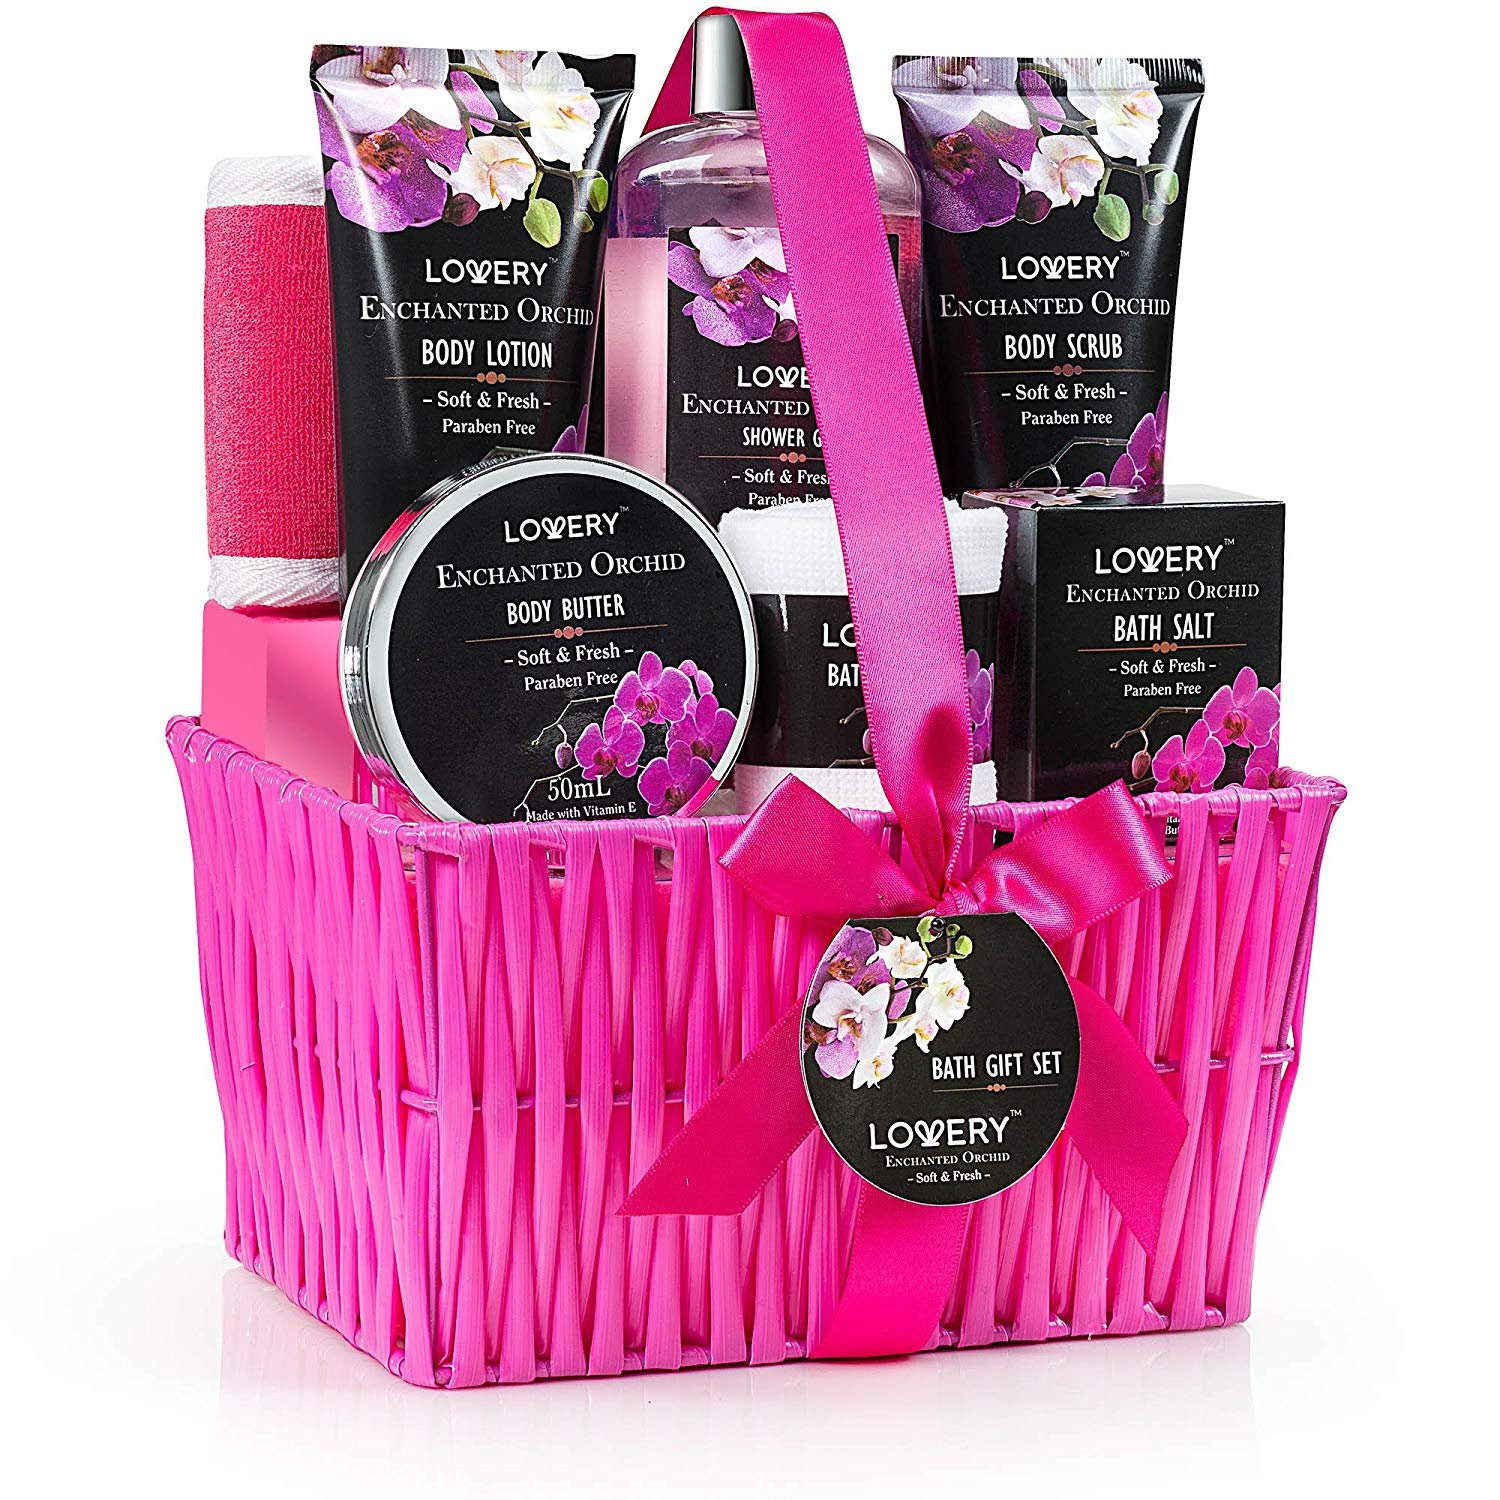 Bath Gift Basket Ideas
 Gift Baskets for Women Lovery Spa Gift Set for Her 1